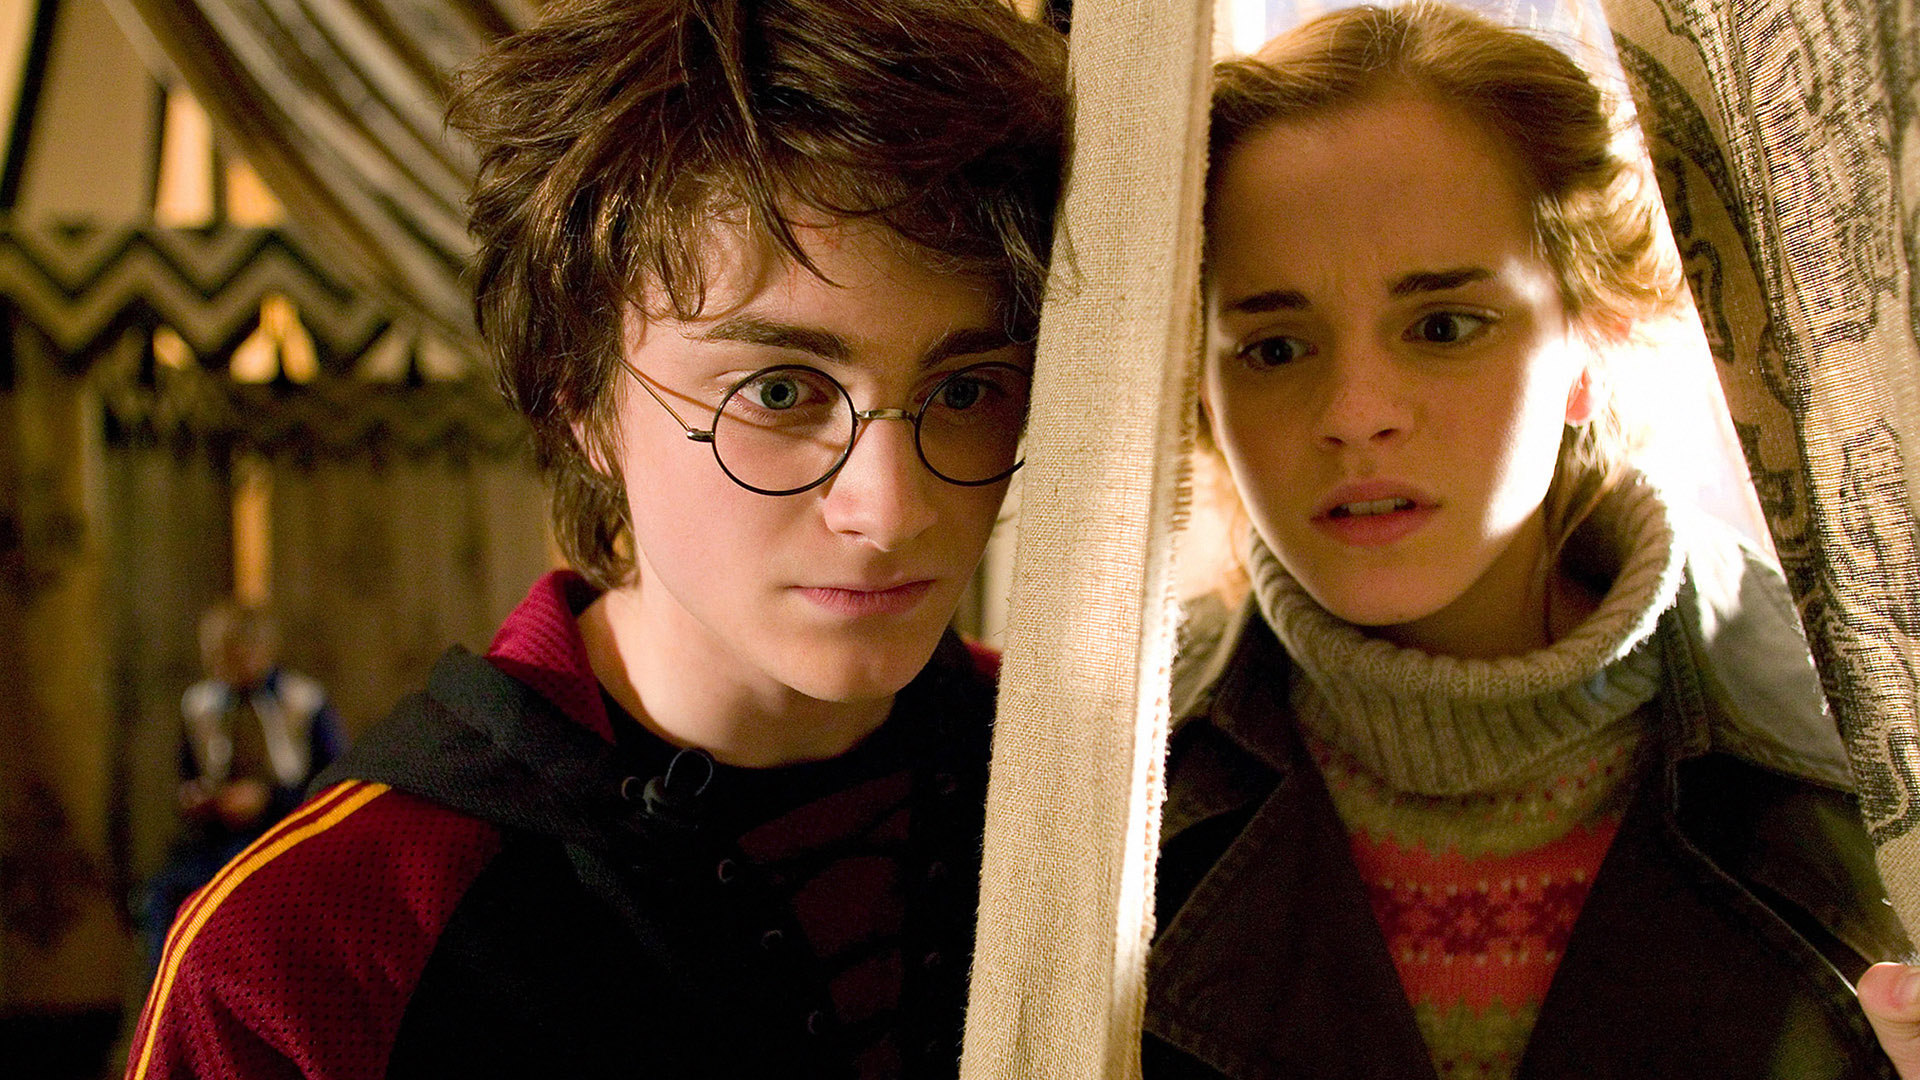 This Awful Mary Sue Character Made JK Rowling Rewrite One Of The Harry Potter Books